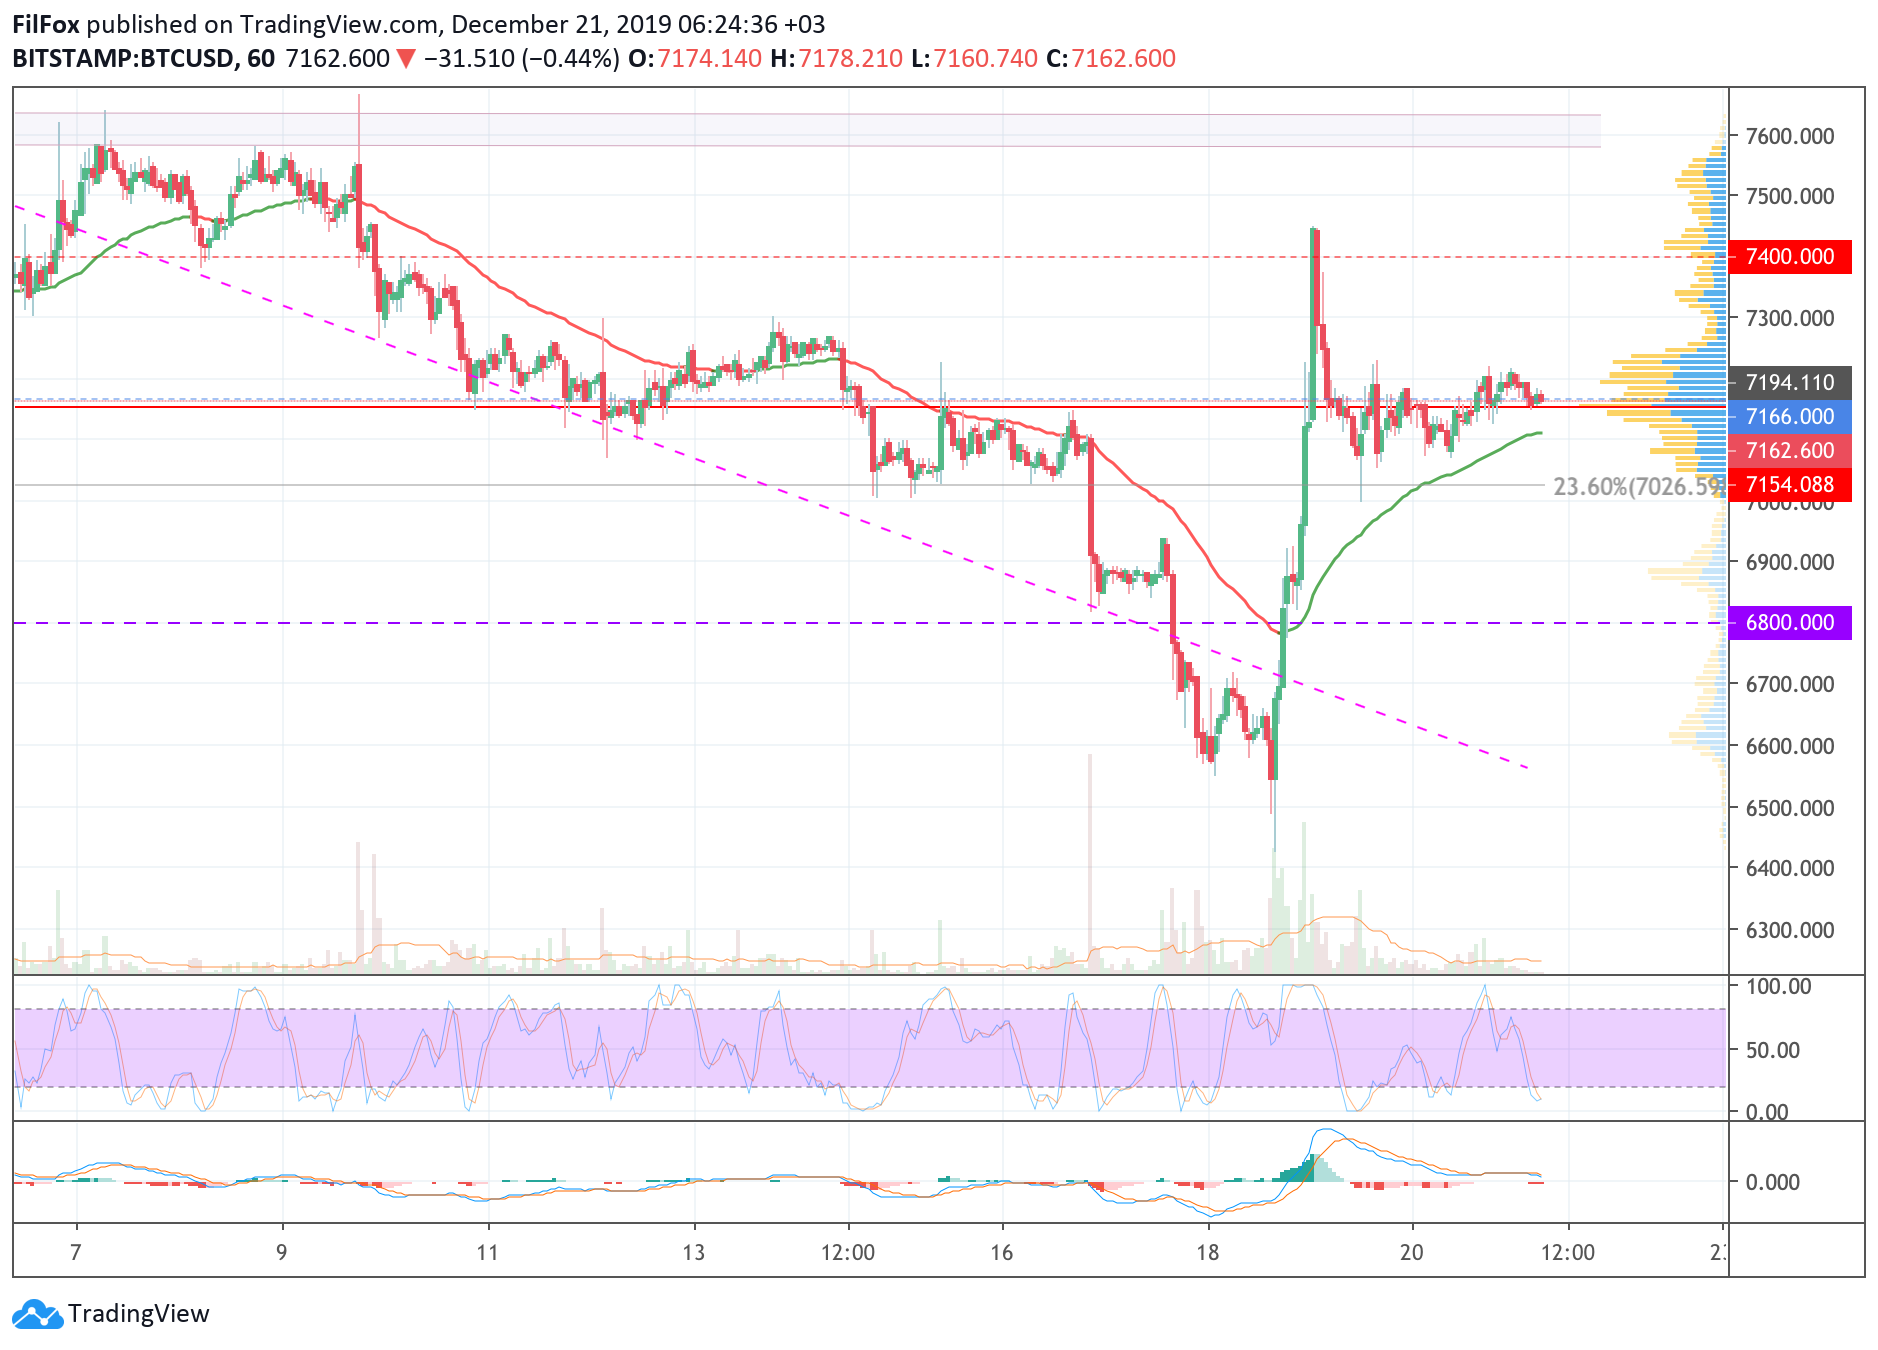 Analysis of cryptocurrency pairs BTC / USD, ETH / USD and XRP / USD on 12/21/2019